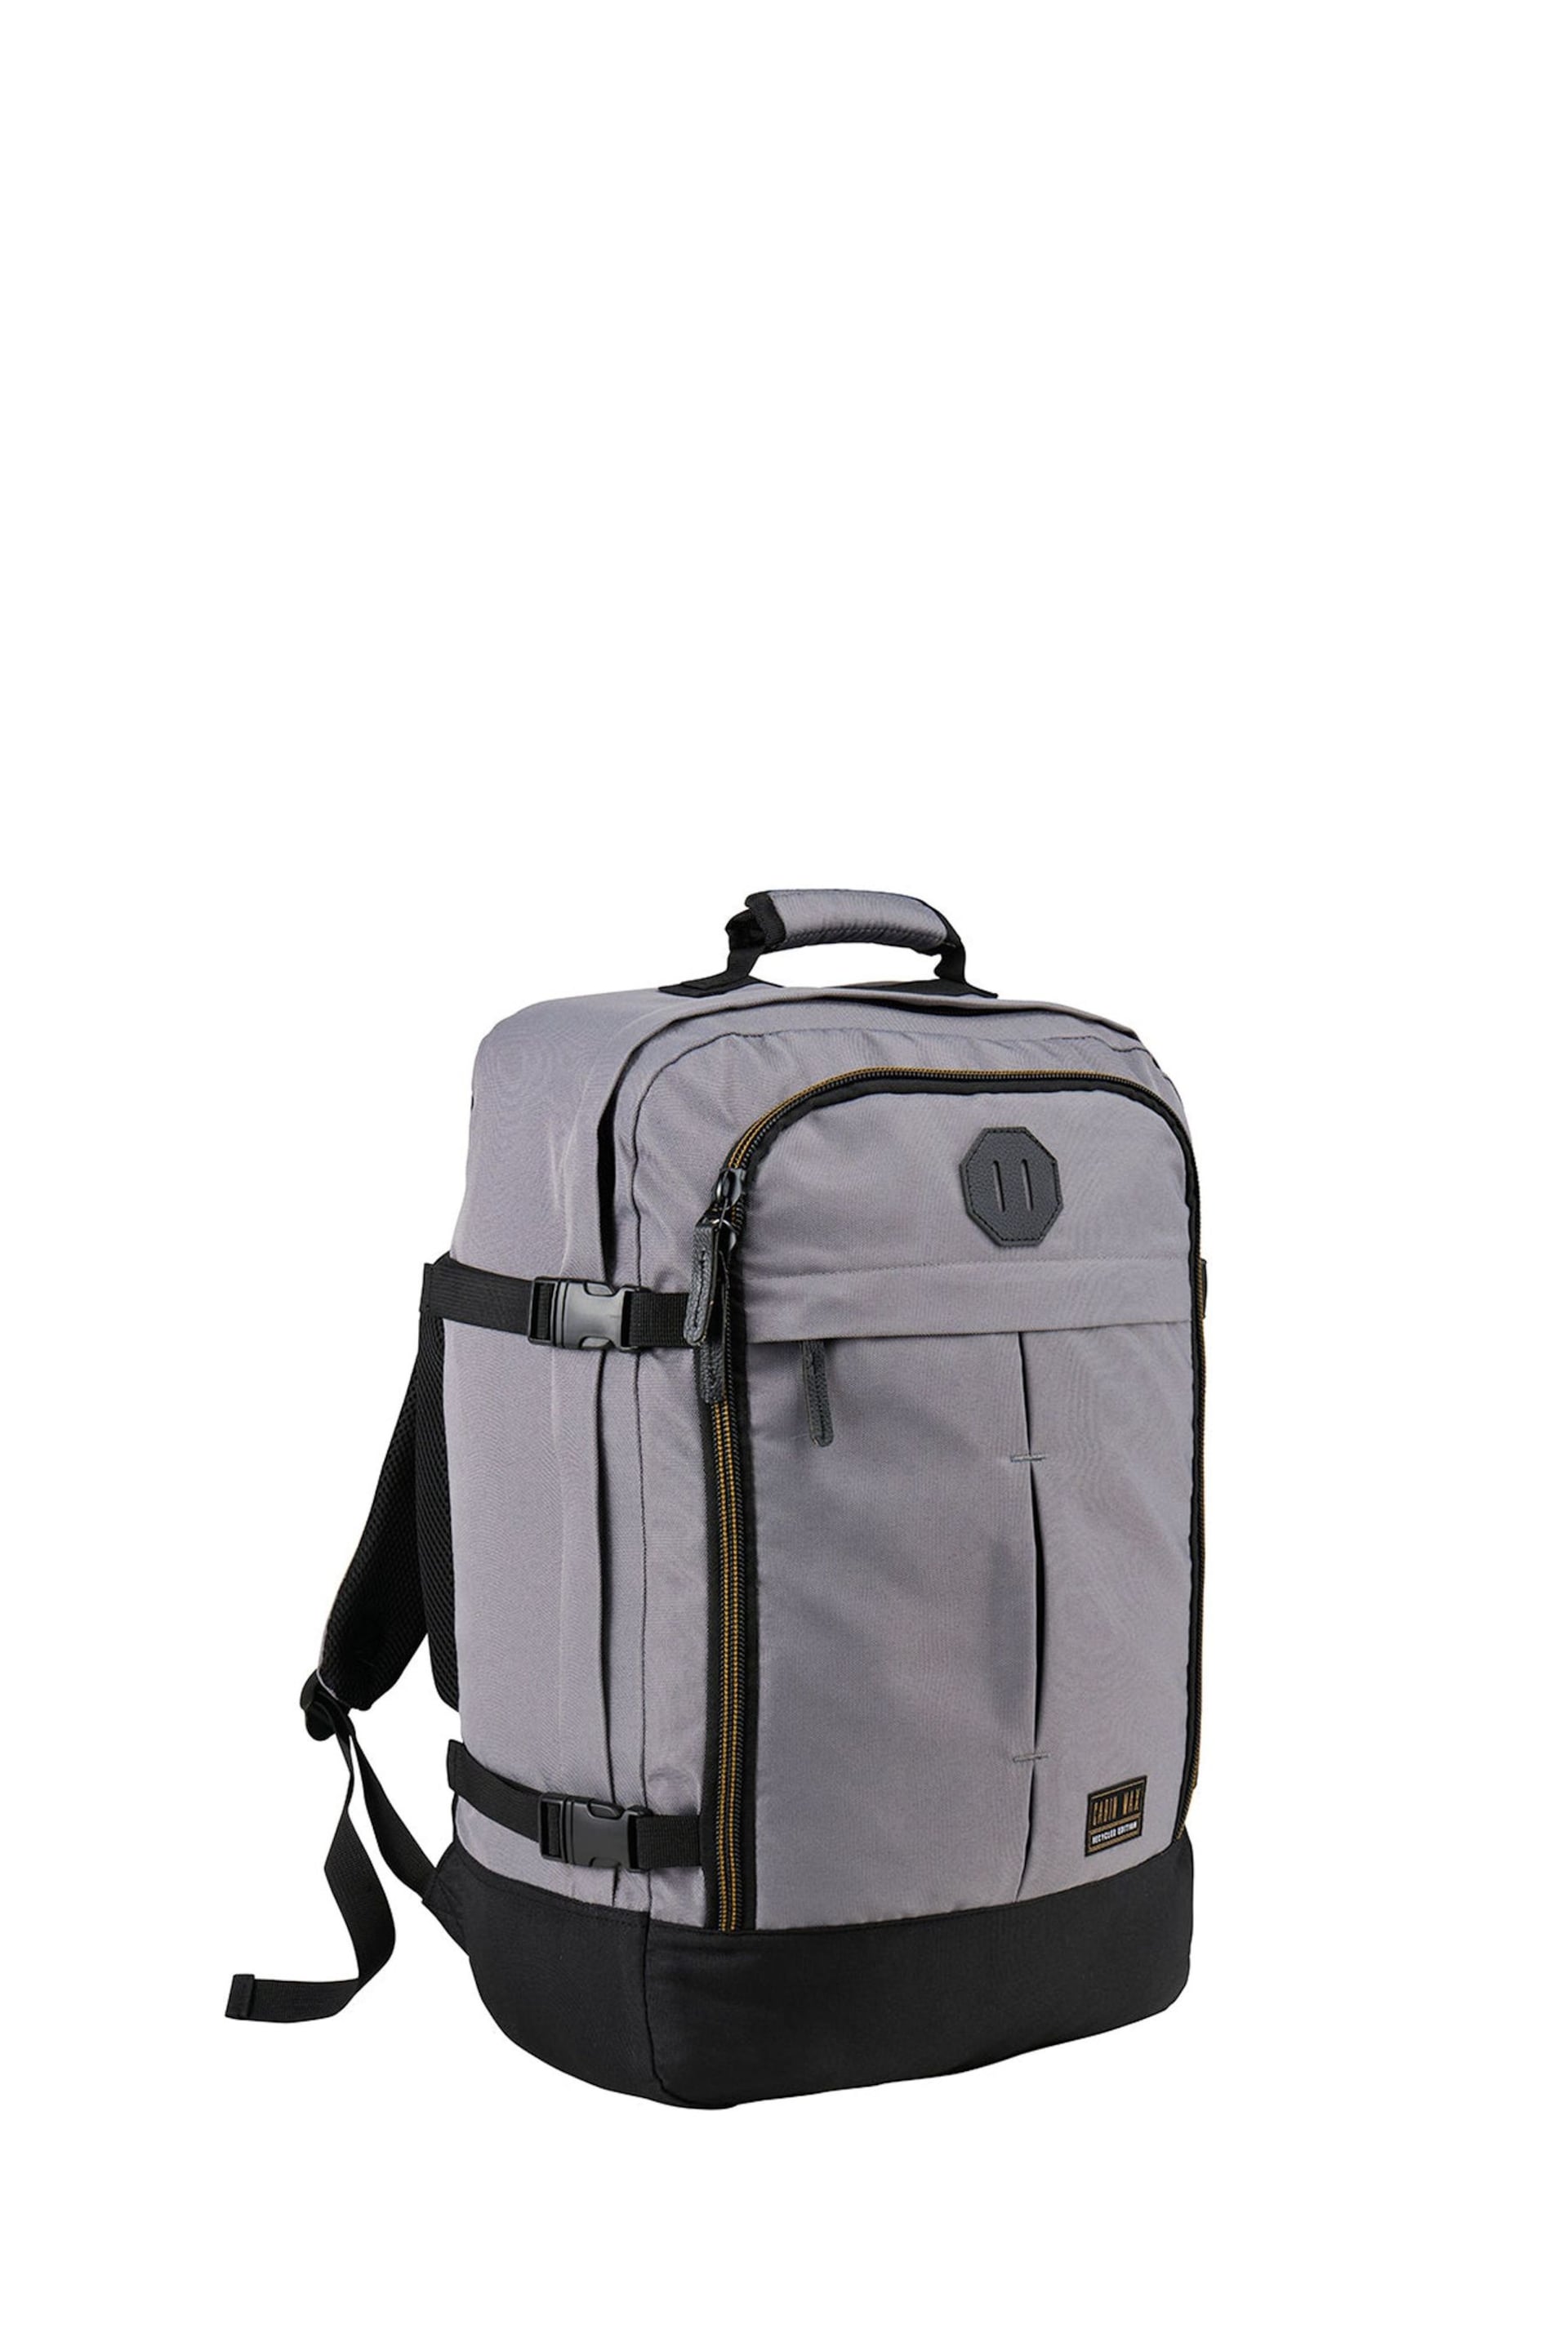 Cabin Max Metz 44L Carry On 55cm Backpack - Image 3 of 5